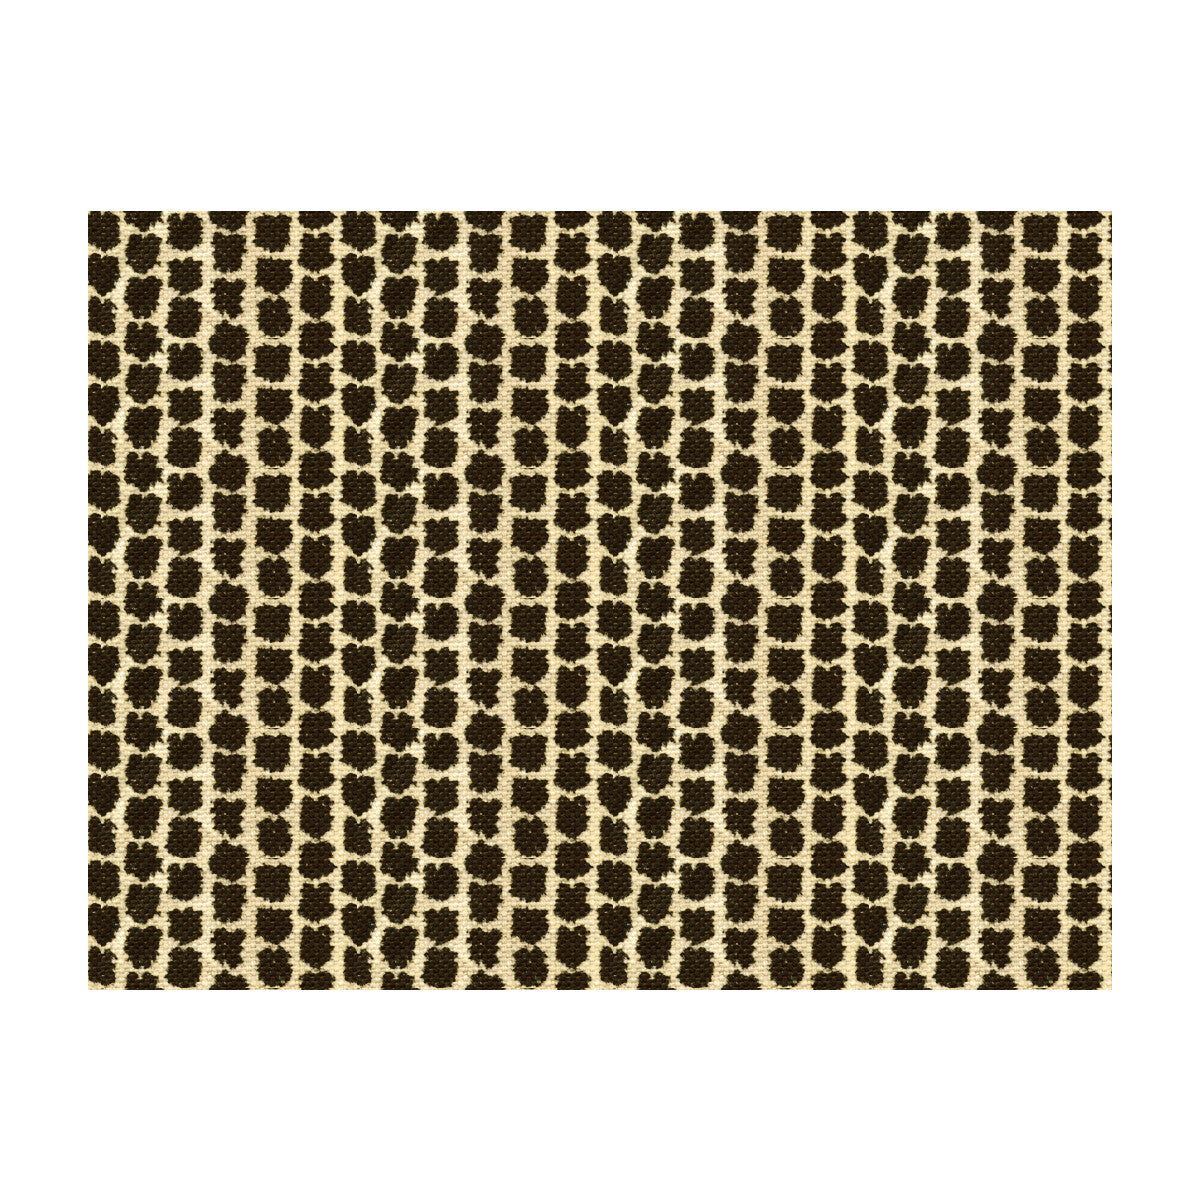 Kaya fabric in sable color - pattern 2012101.6.0 - by Lee Jofa in the The Malika collection